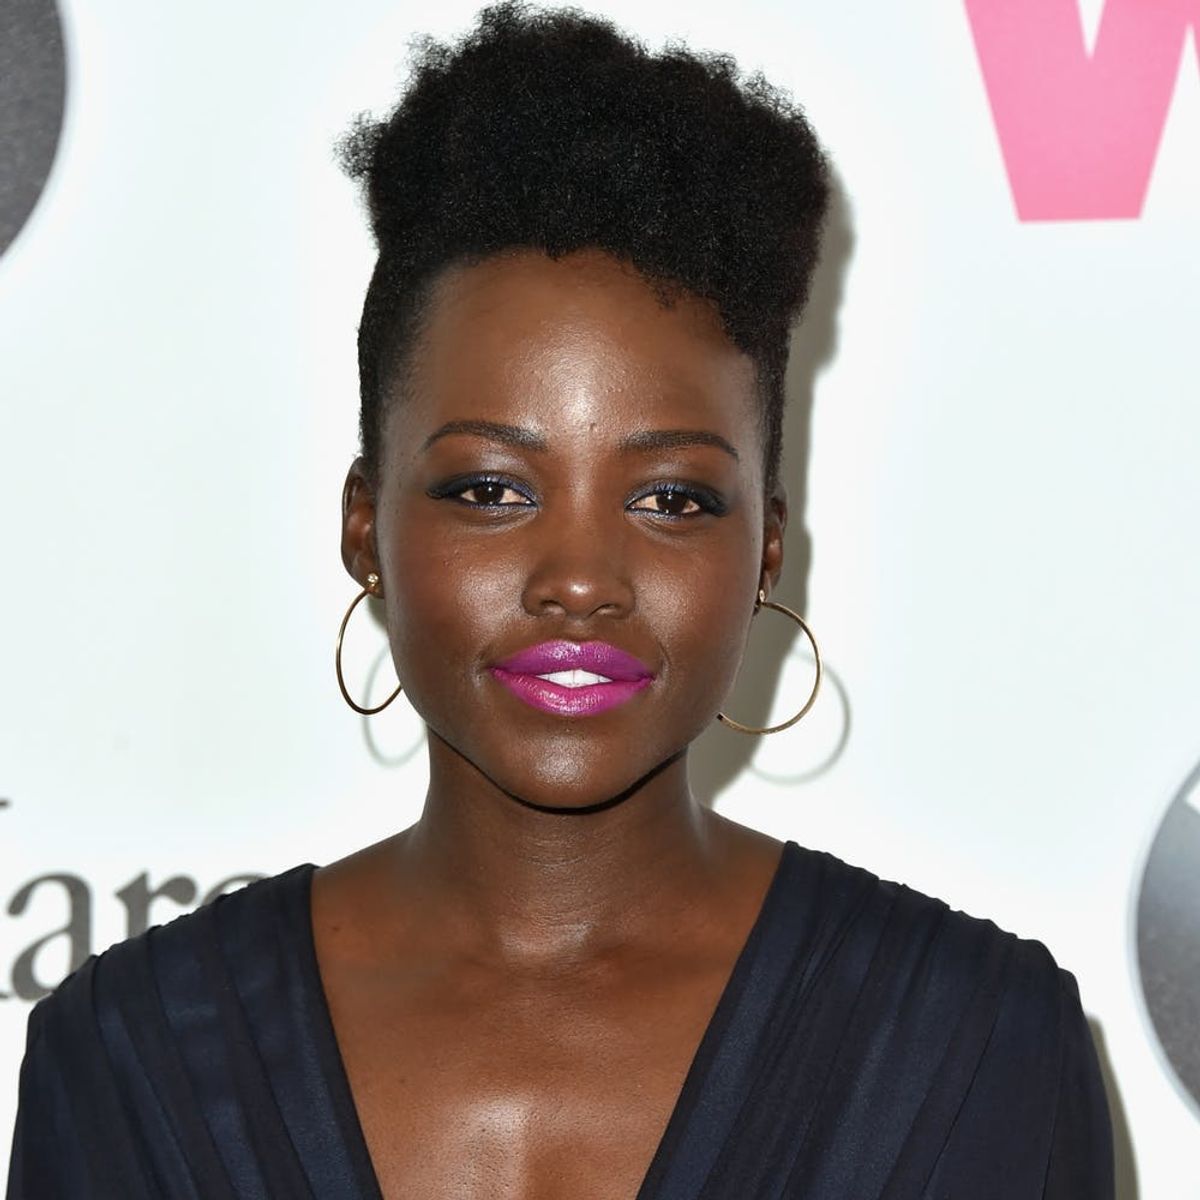 Lupita Nyong’o Has Shared a Disturbing Harvey Weinstein Story of Her Own